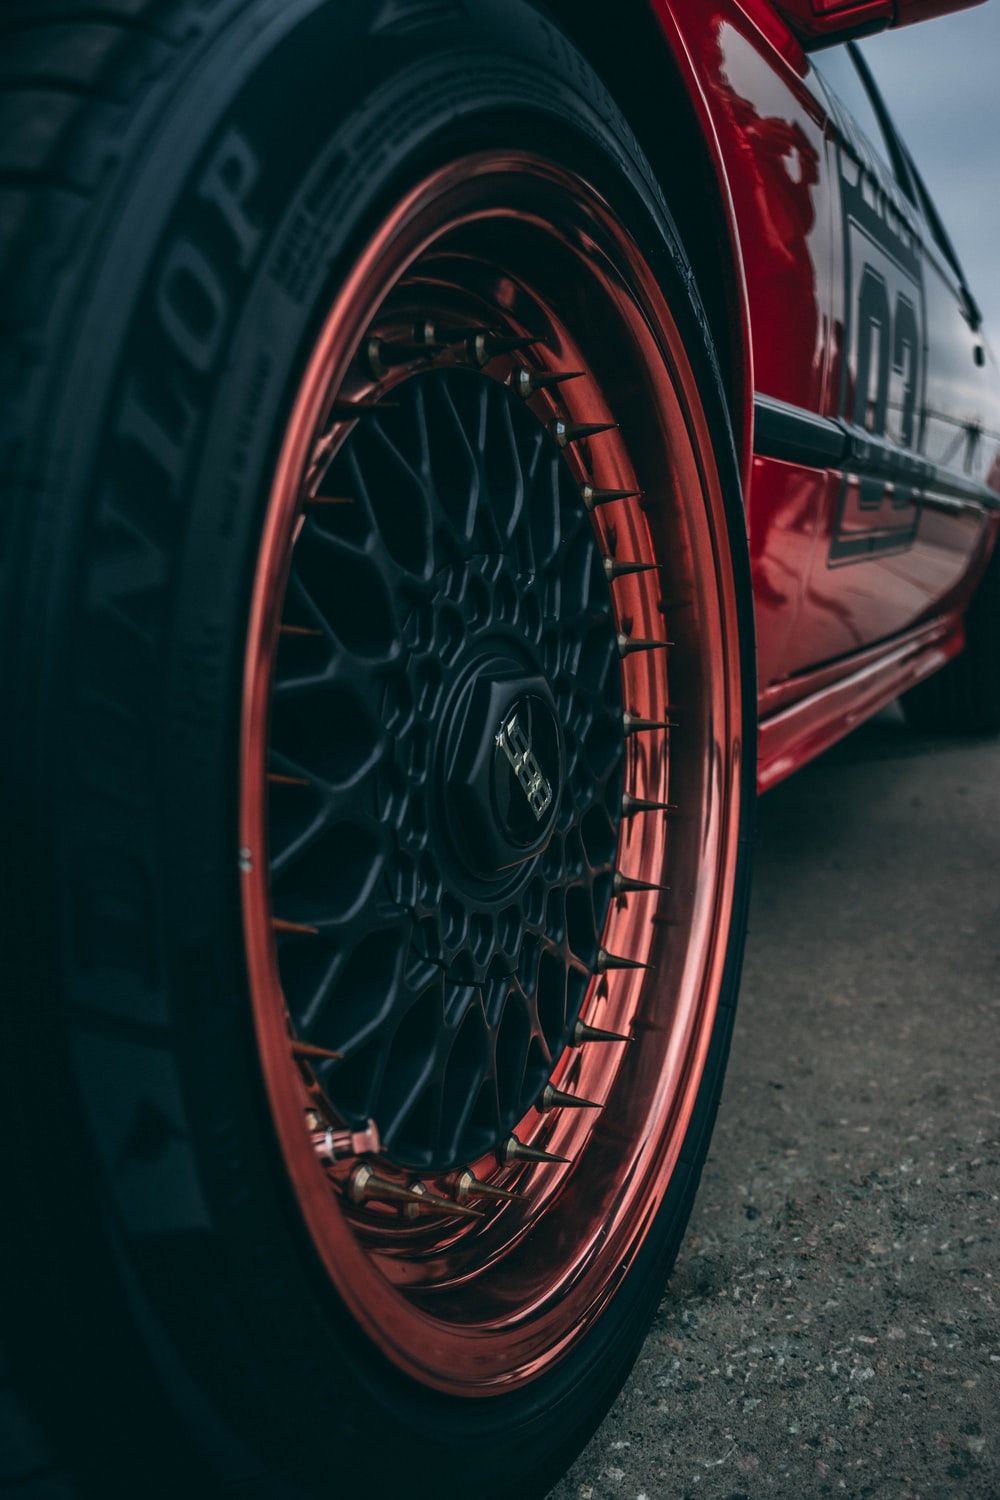 Wheel Picture. Download Free Image